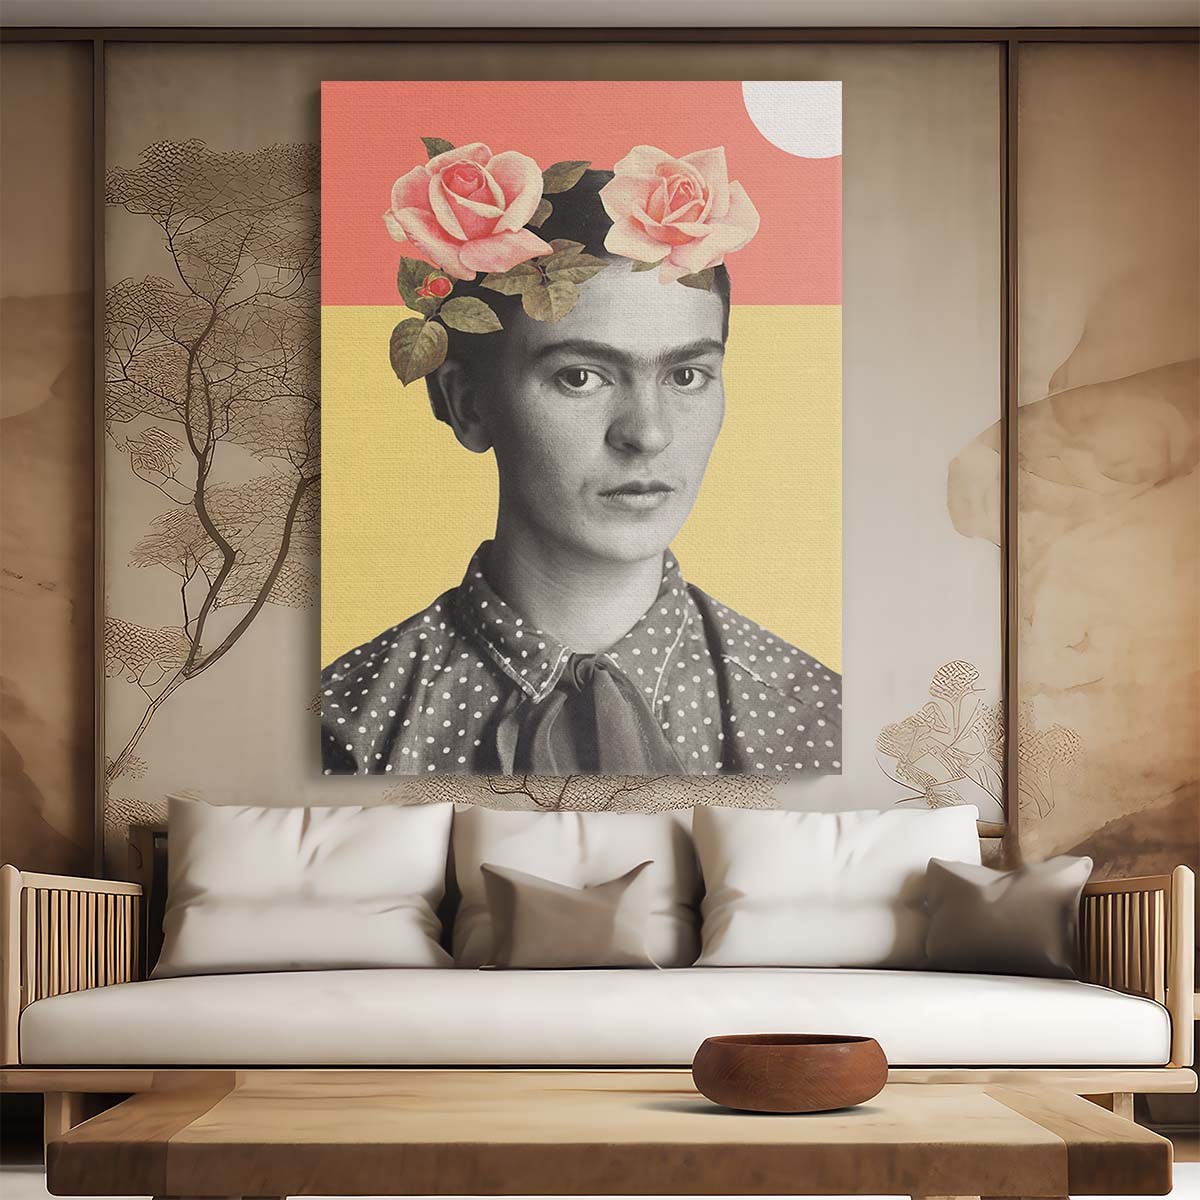 Colorful Frida Kahlo Portrait Illustration with Floral Montage by Luxuriance Designs, made in USA